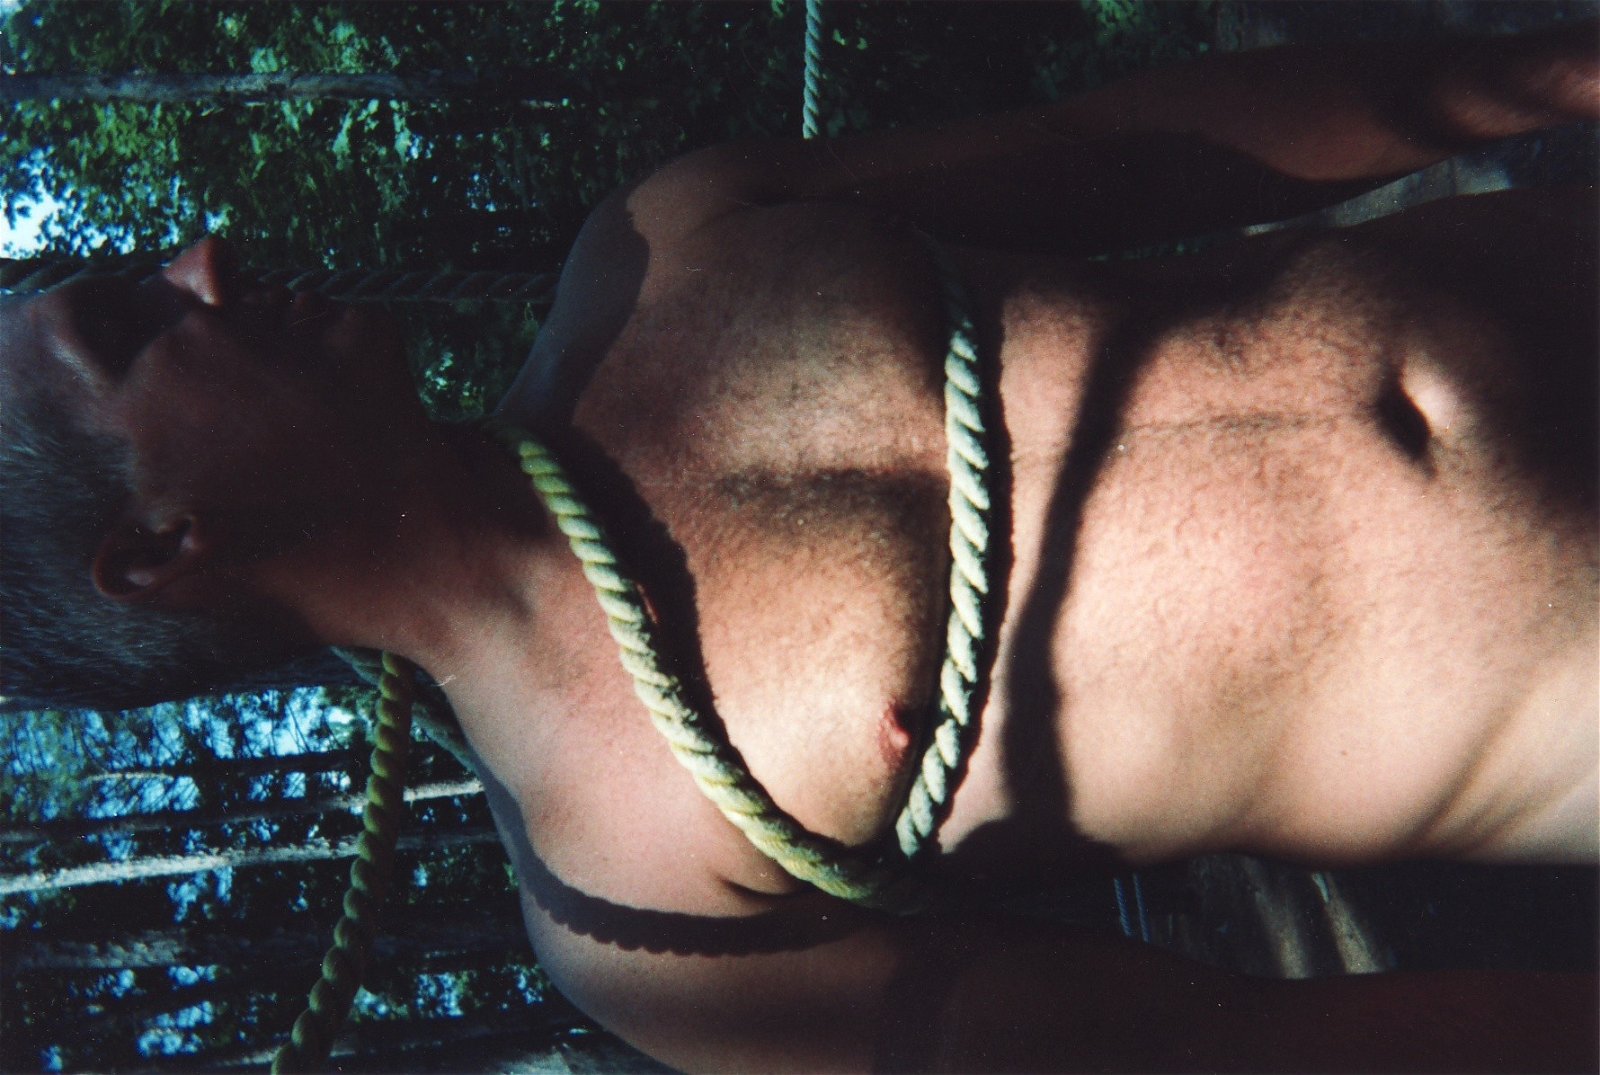 Photo by Hairy Musclebears with the username @hairymusclebears,  August 18, 2019 at 12:17 PM. The post is about the topic GayTumblr and the text says 'Gay Redneck Bondage Men from USAFUR.com personals #gayslave #kidnapped #muscle #perfection #ducttape #tightgagged #tightgag #chest #armmuscle #sleazymadrid #sleazymadrid2018 #gayhot #harness #gayharness #gaymadrid #gaymadridcentro #instagay..'